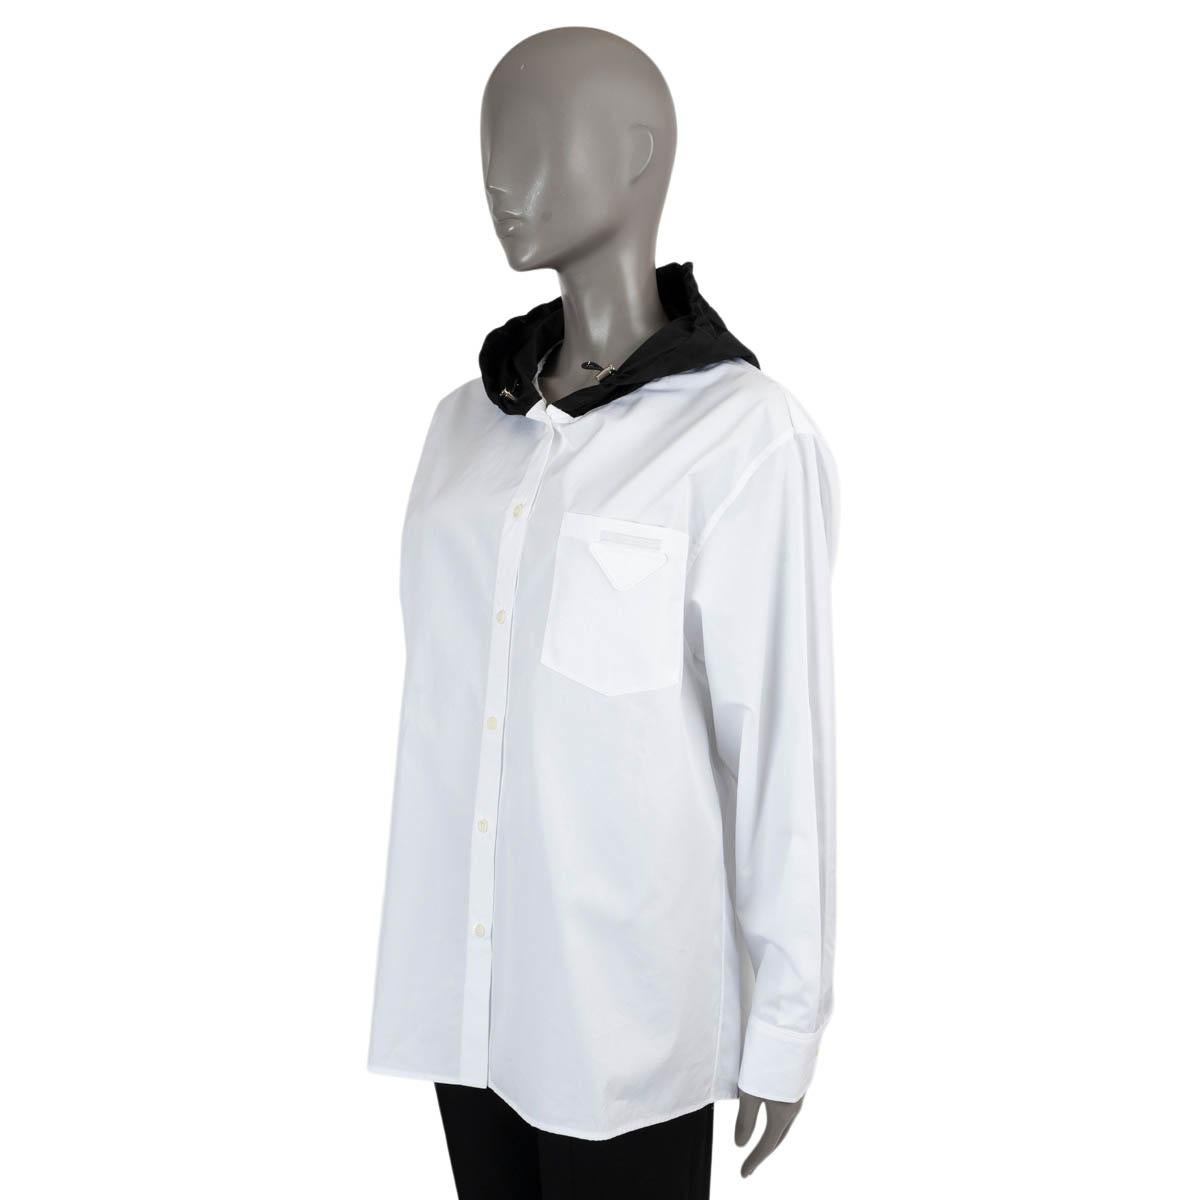 100% authentic Prada button-up shirt in white cotton (100%). Features a black hood in re-nylon, a chest pocket with triangle patch and logo label. Has been worn and is in excellent condition. 

2022 Pre-Fall

Measurements
Tag